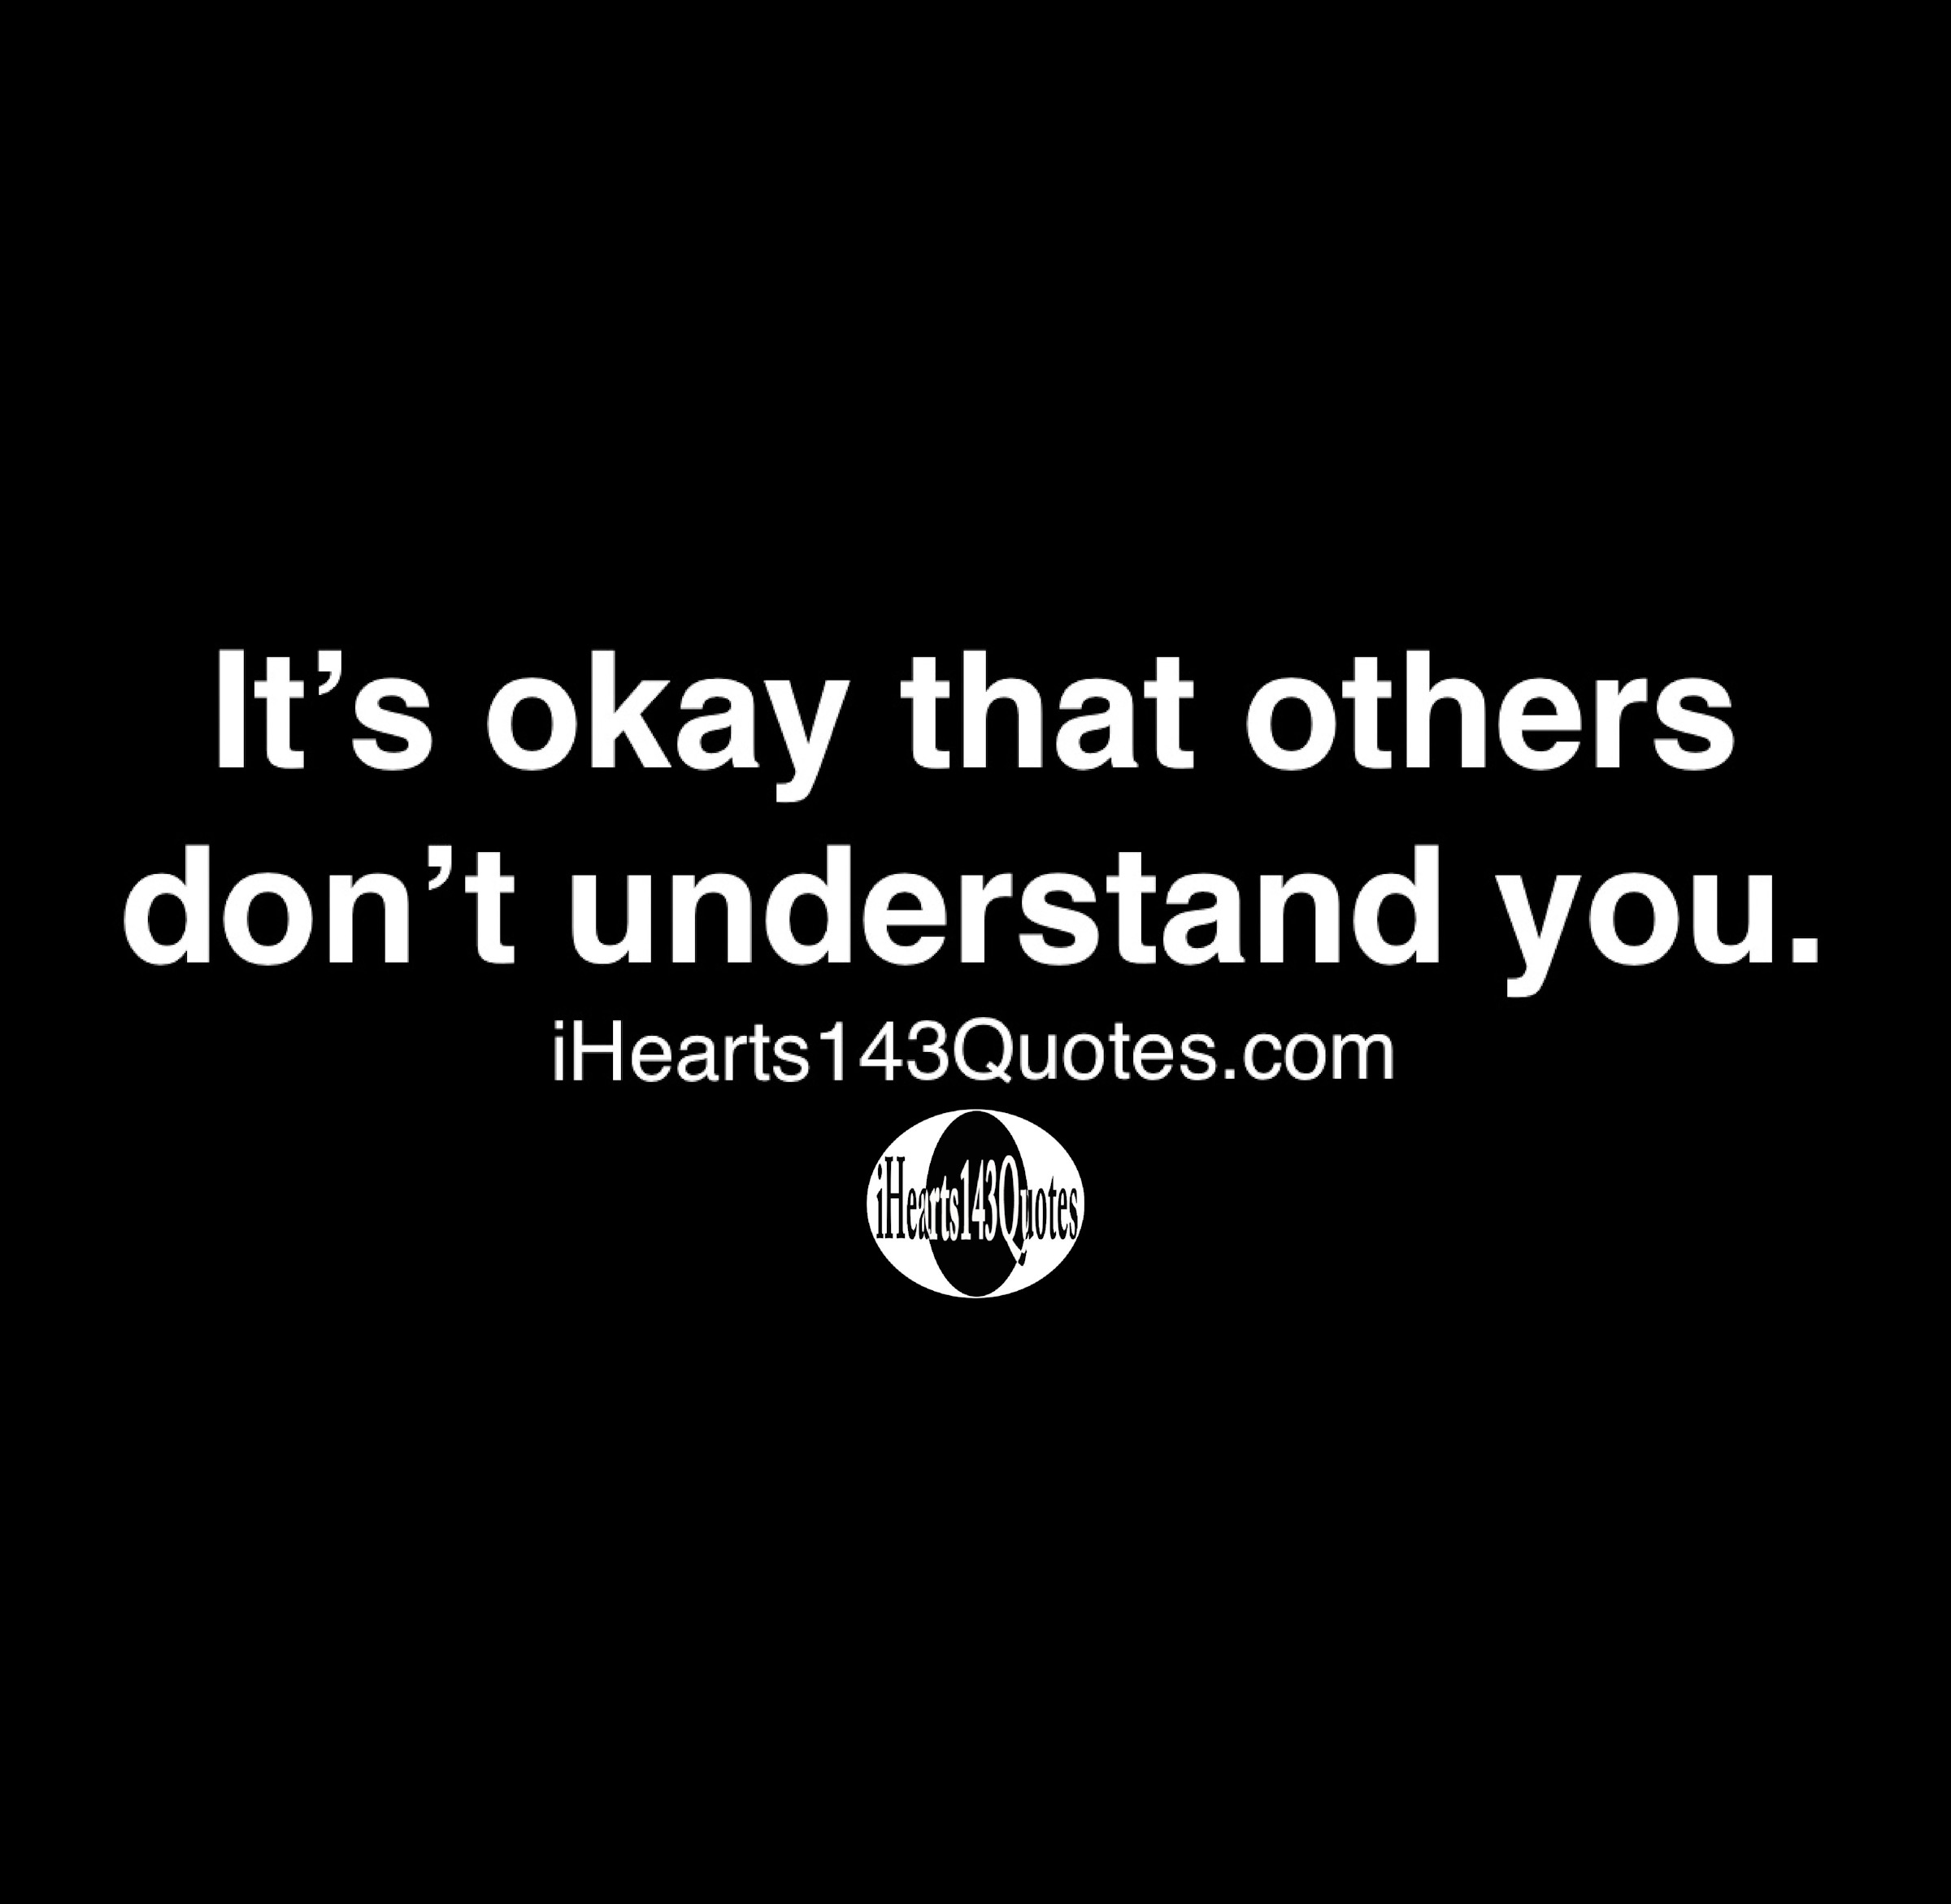 It S Okay That Others Don T Understand You Quotes Ihearts143quotes